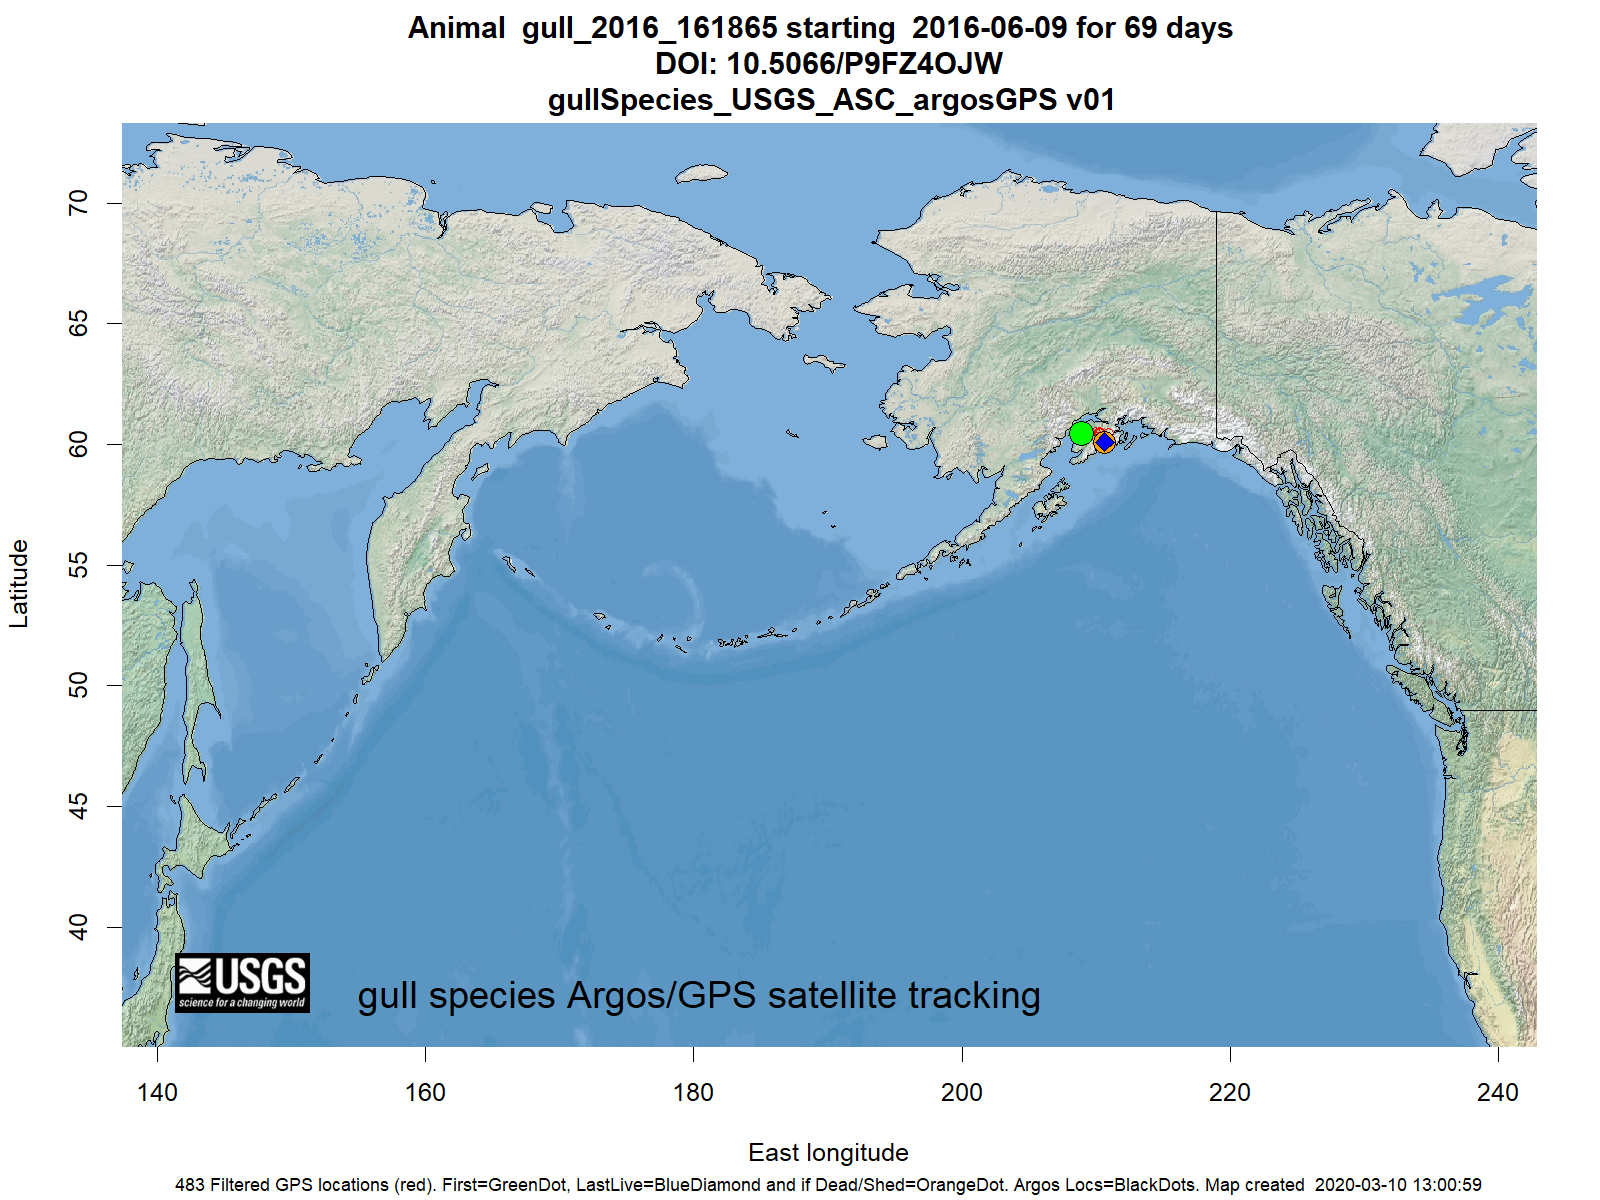 Tracking map for species gull_2016_161865